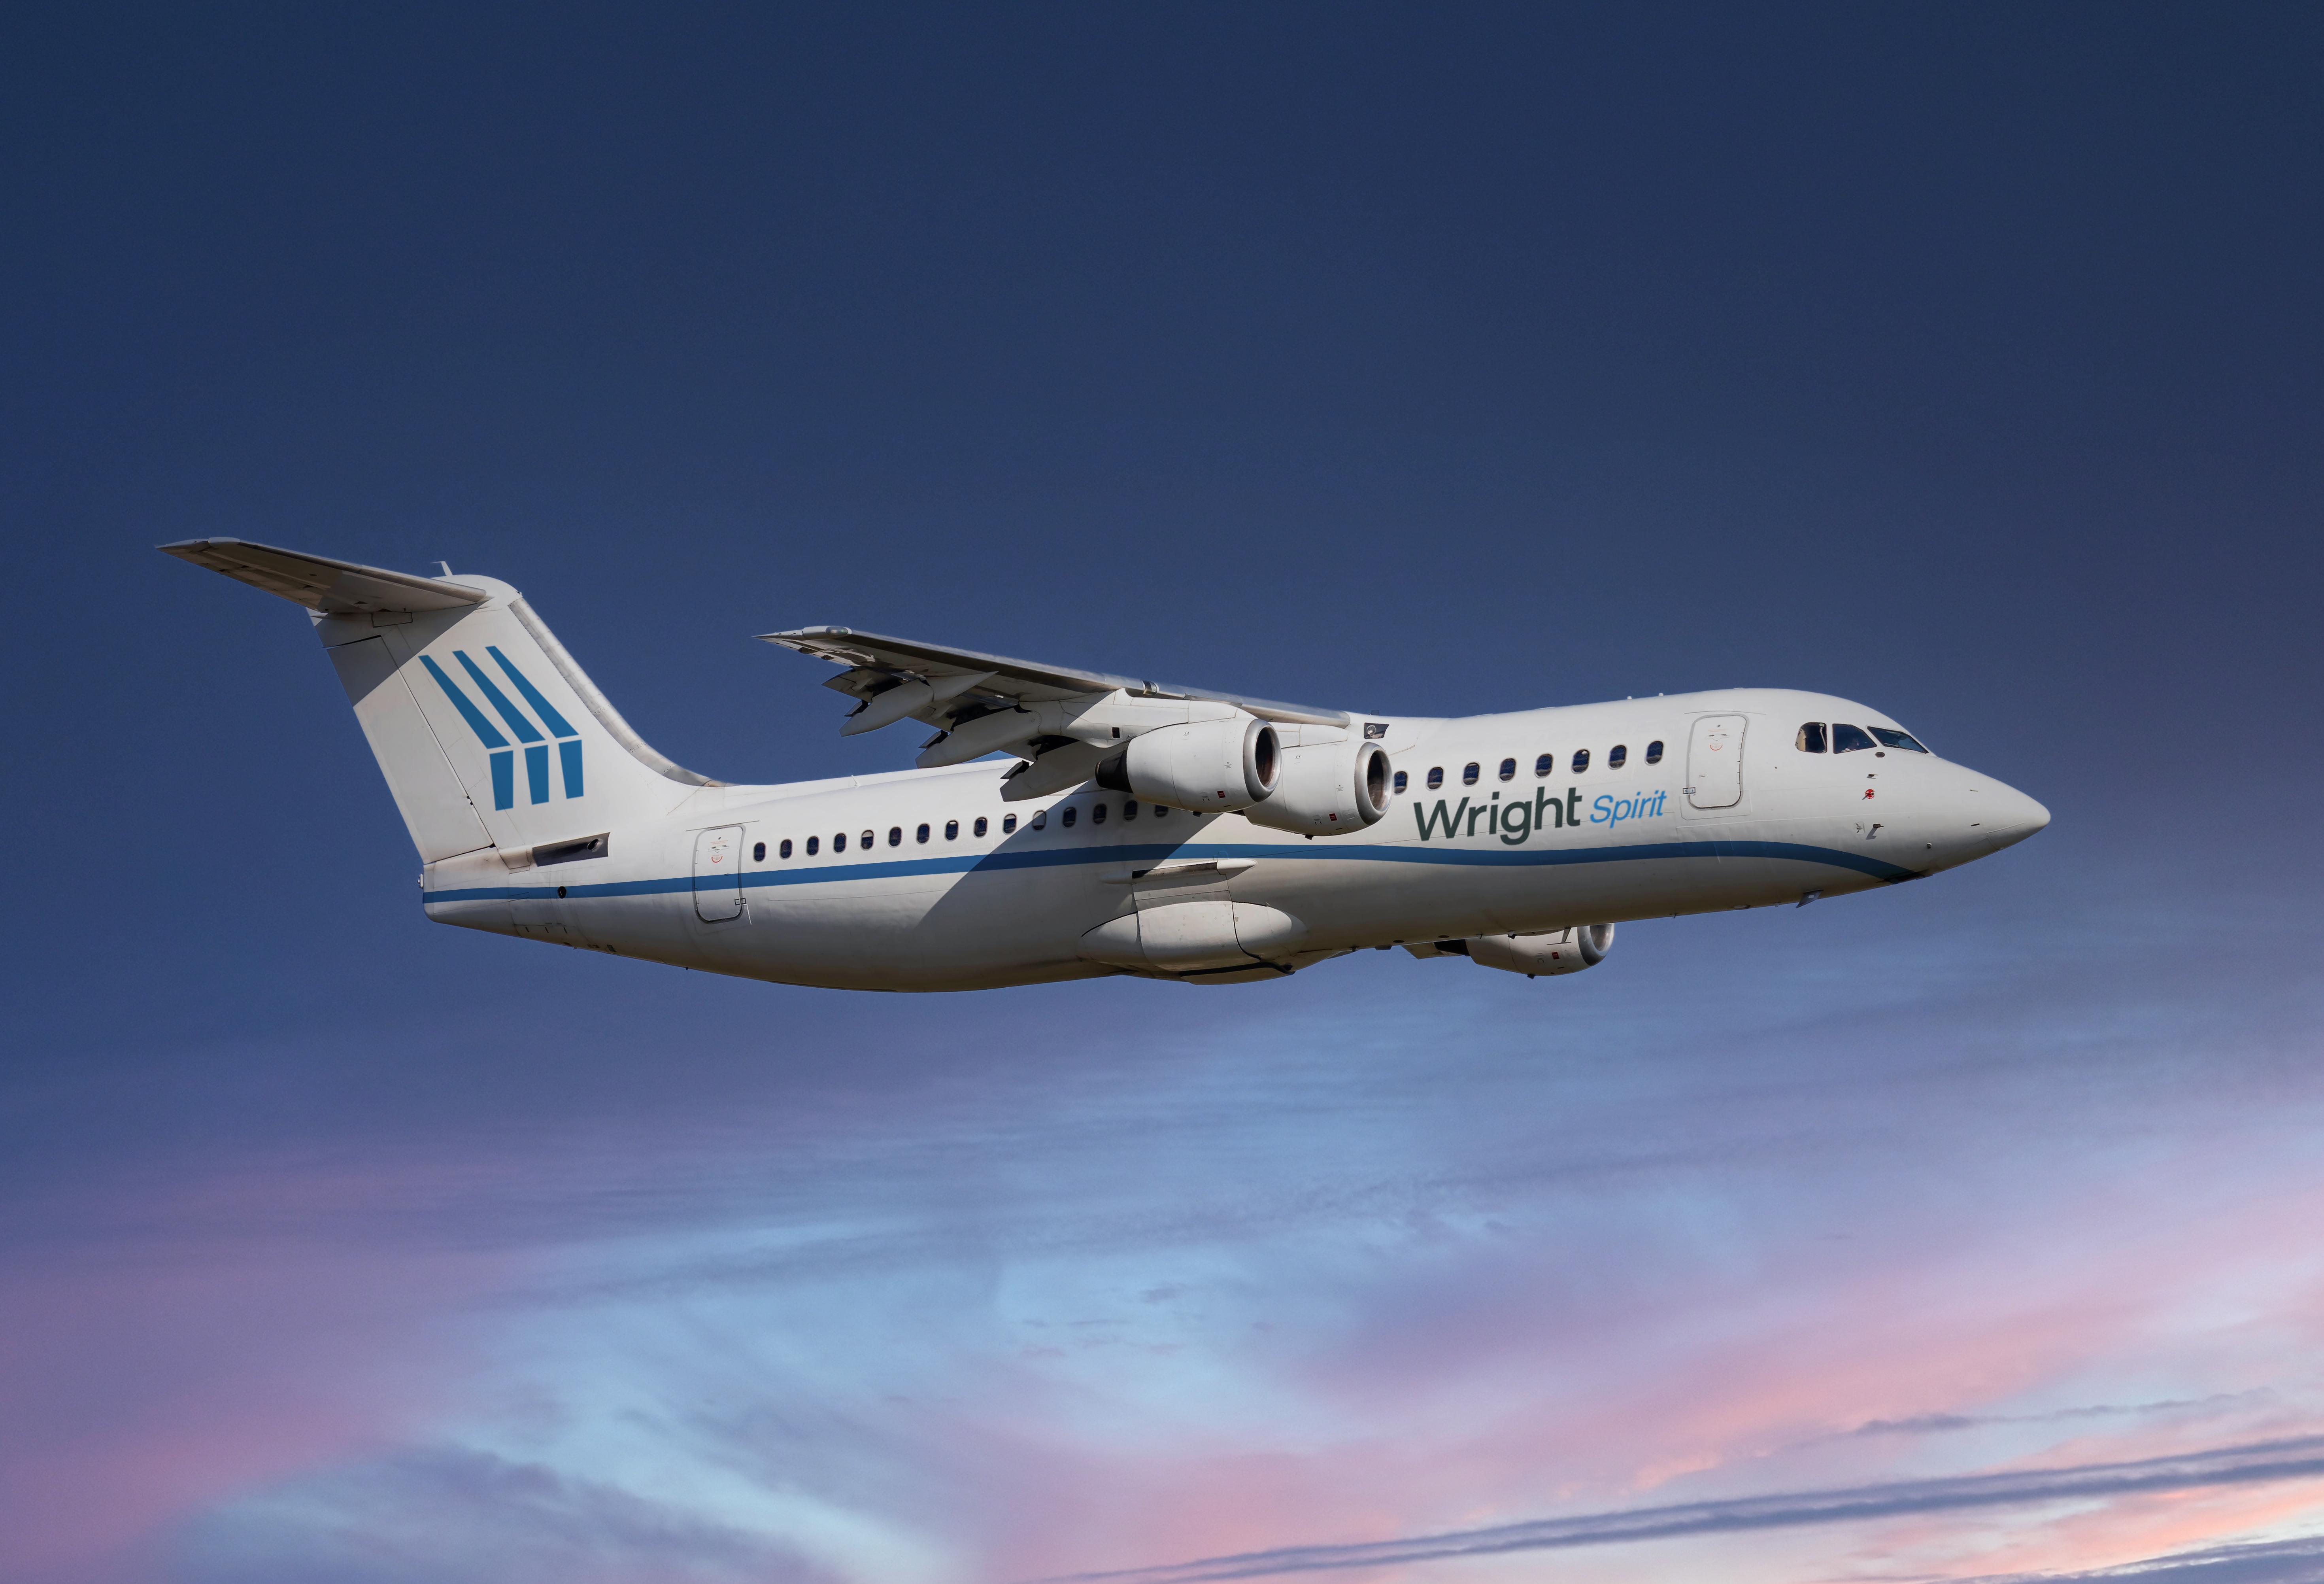 The 100-seat Wright Spirit is a BAe 146 regional jet modified to zero-emission electric propulsion 